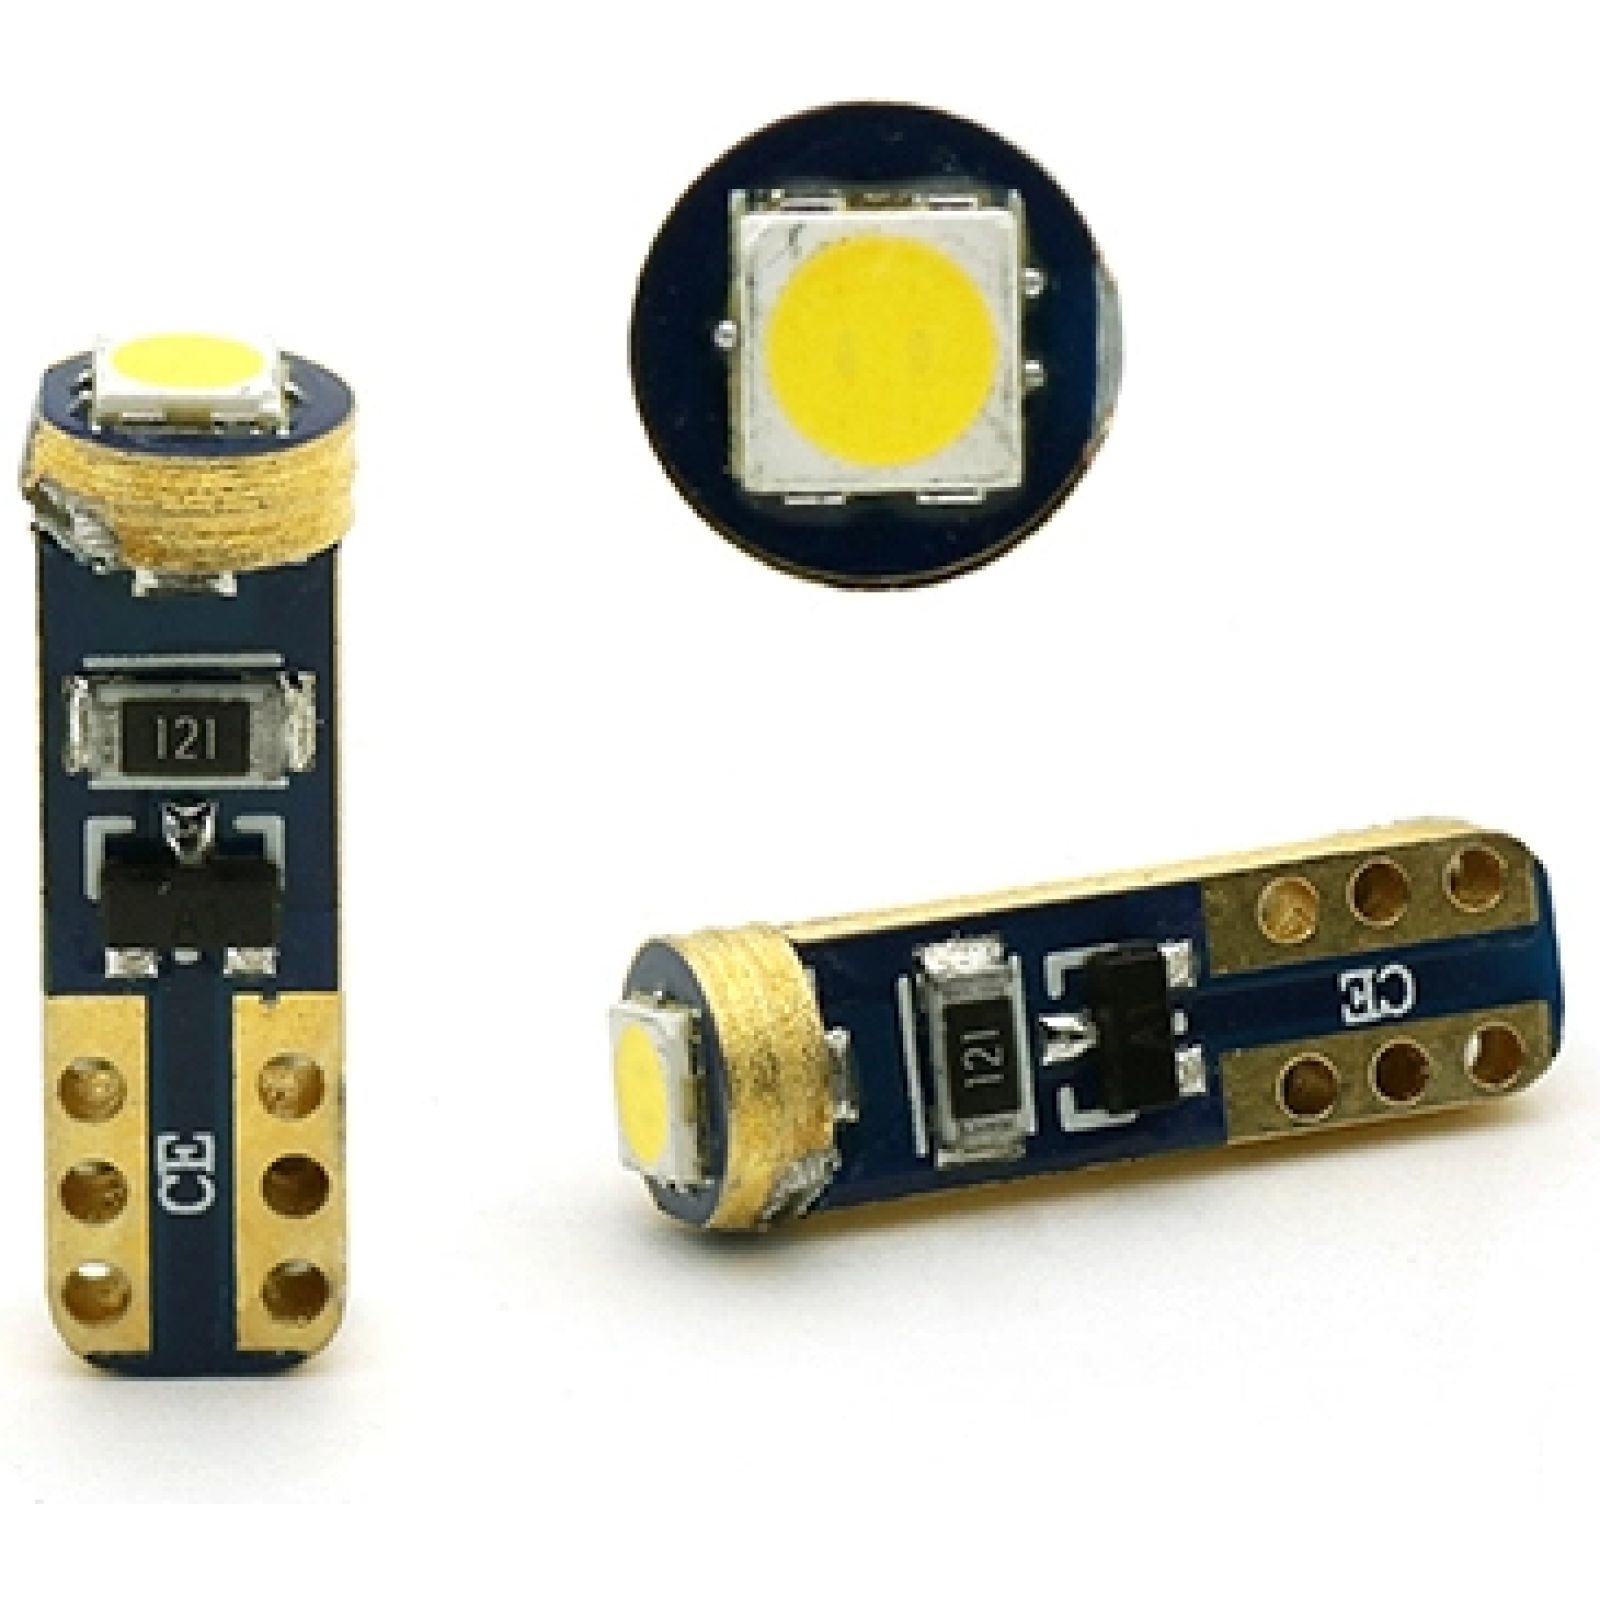 https://www.autoteile-store.at/img/product/led-tachobeleuchtung-t5-w12w-1-led-weiss-10854-327914/e2b44a82b9bdf0774076a701a2fb3adf_1600.jpg